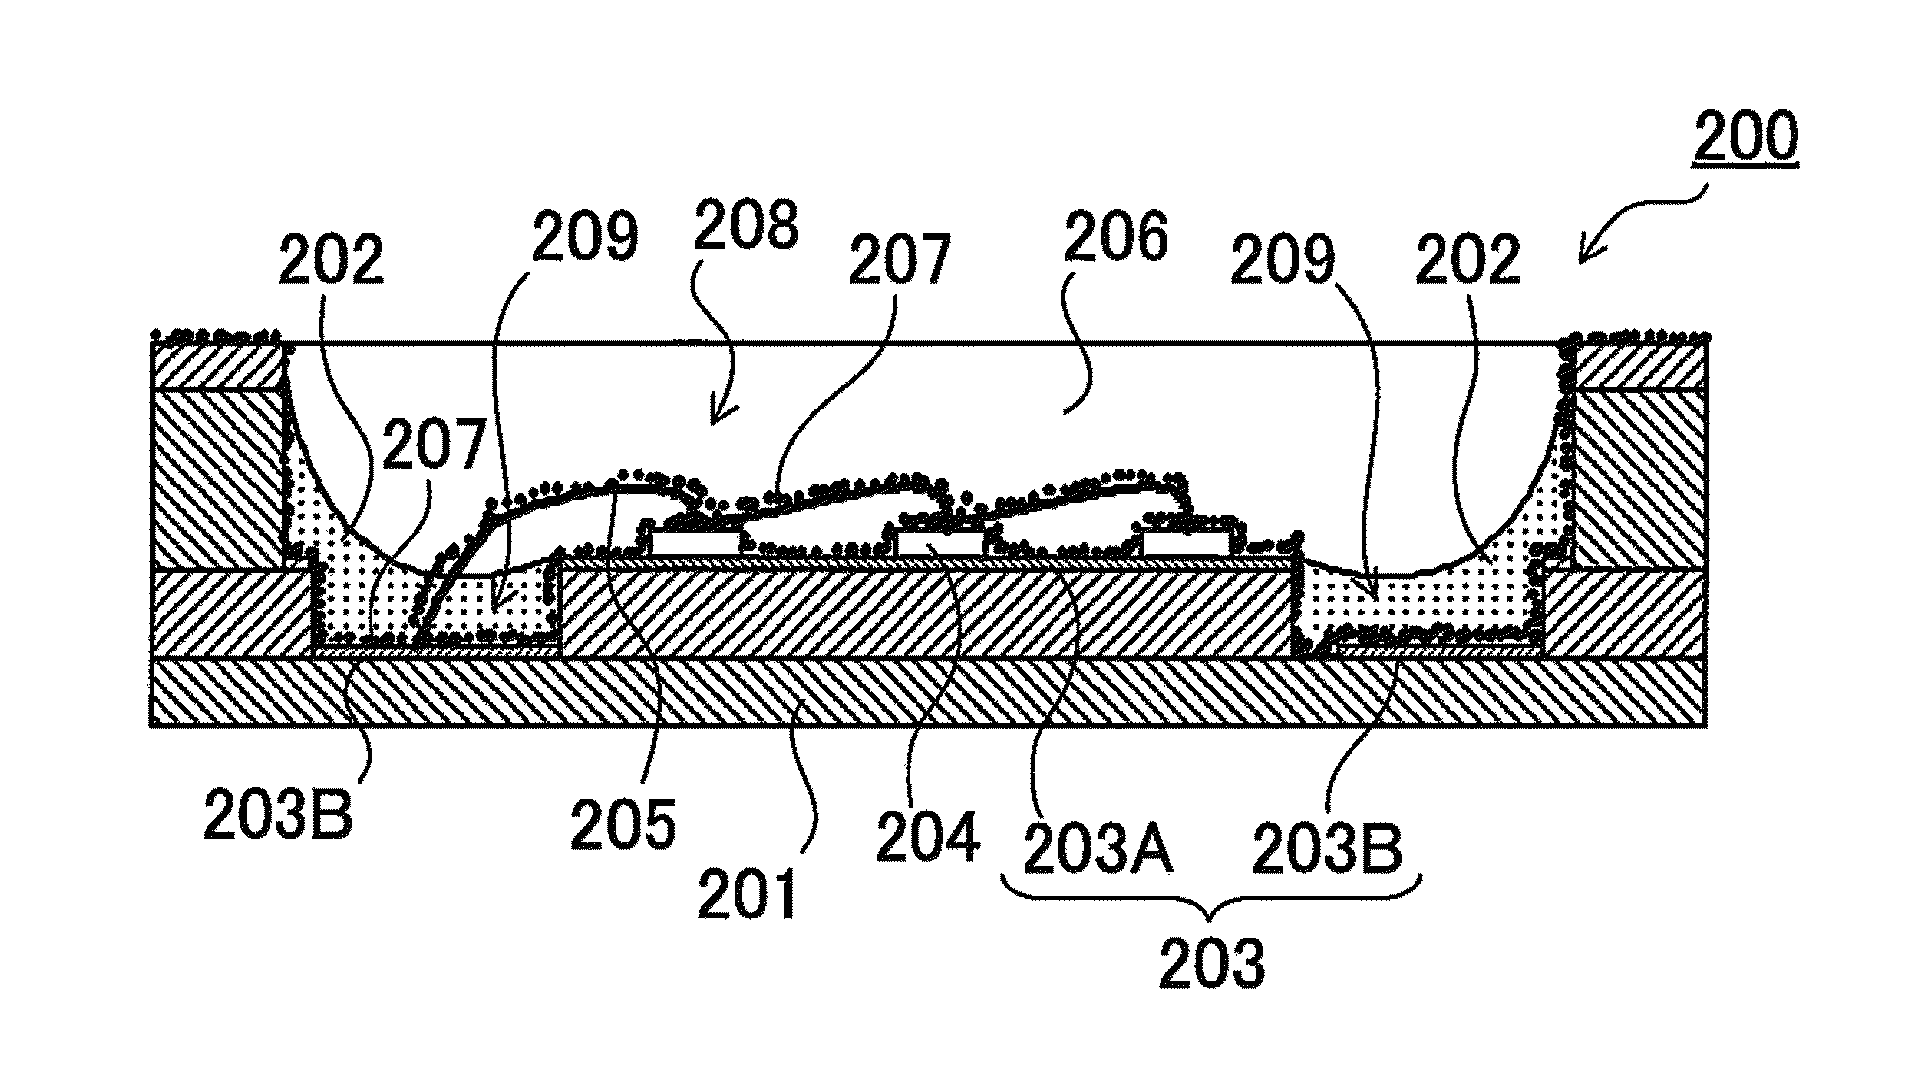 Light emitting semiconductor device and method of manufacture thereof